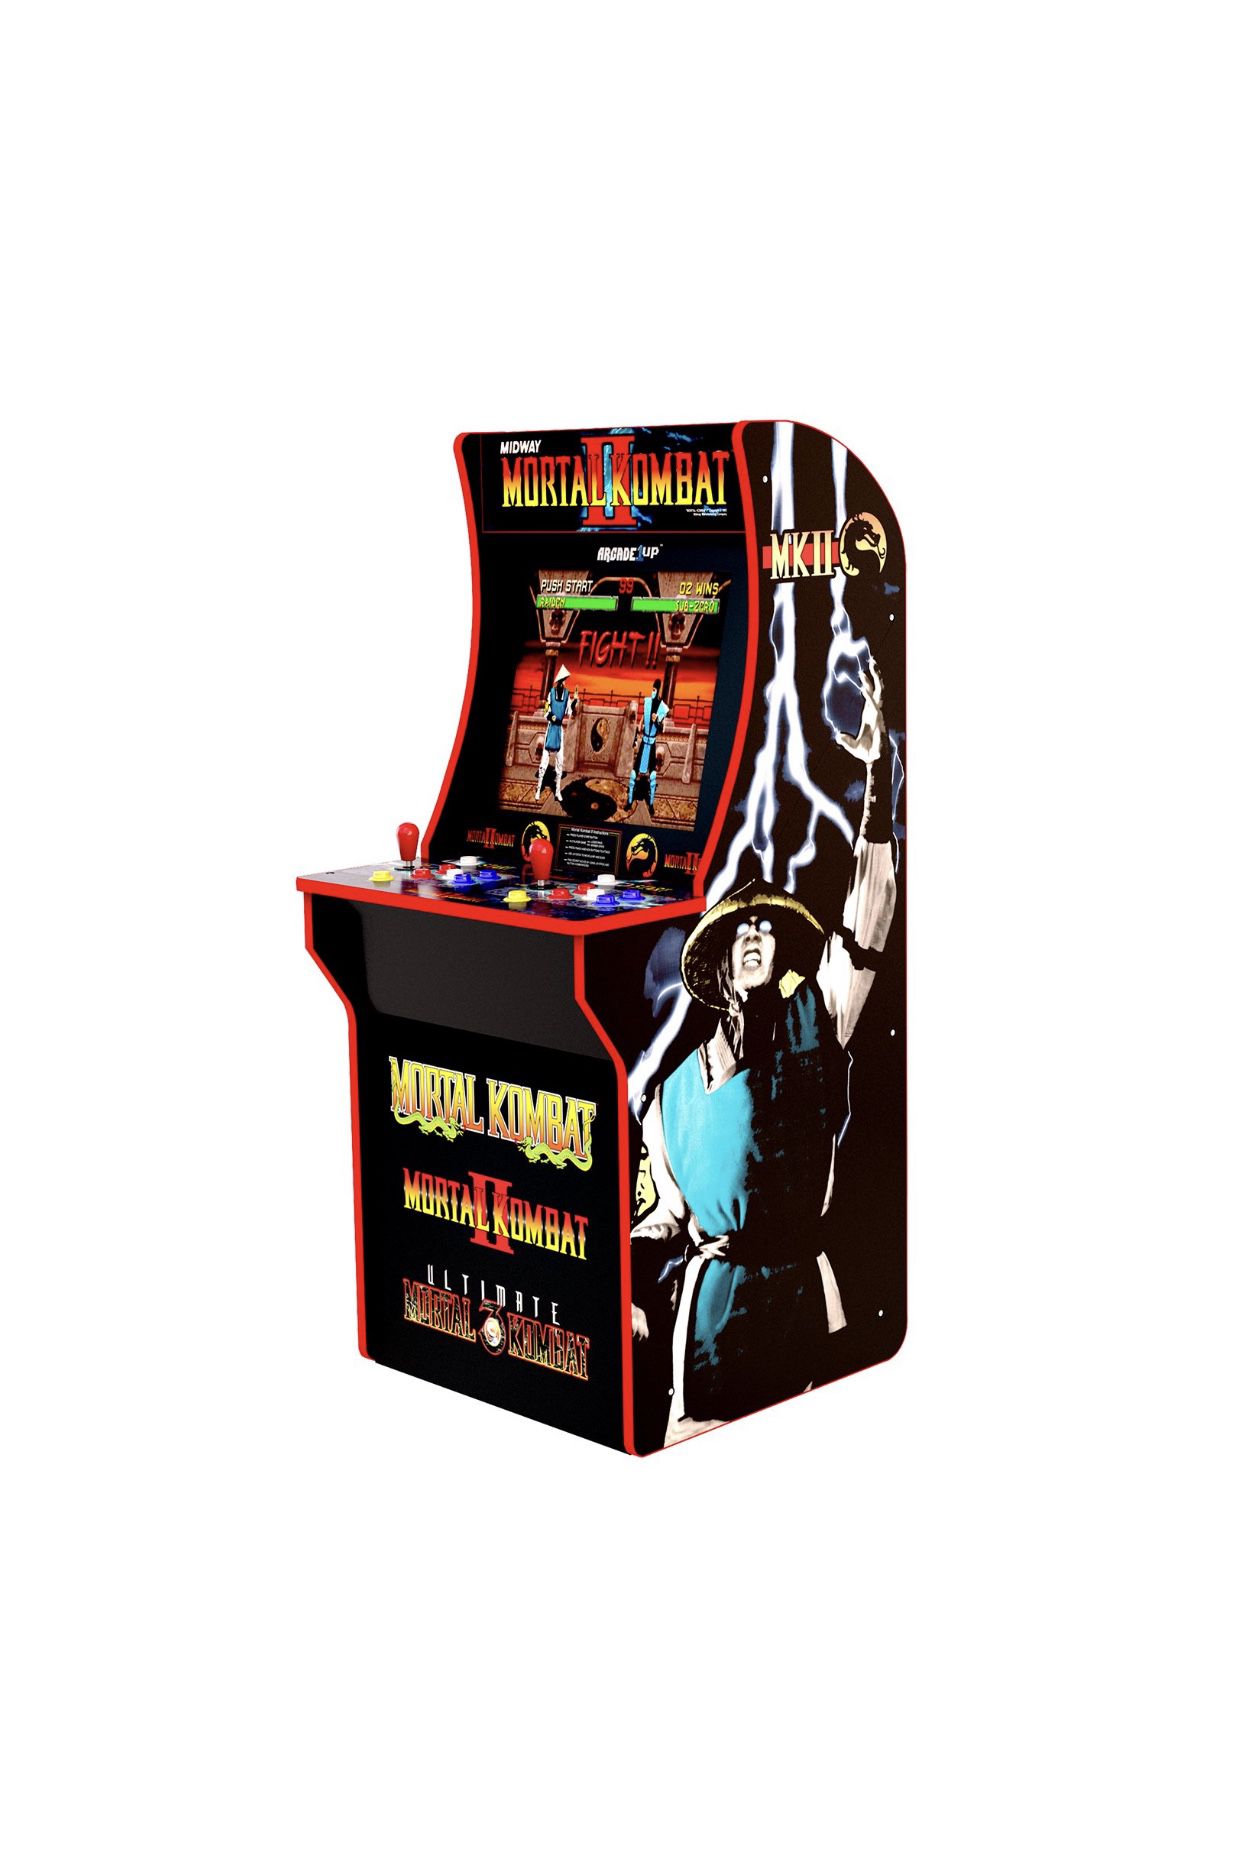 Game Room Arcade 4ft Tall Mortal Kombat Ultimate Edition - Arcade 1Up in Factory Box